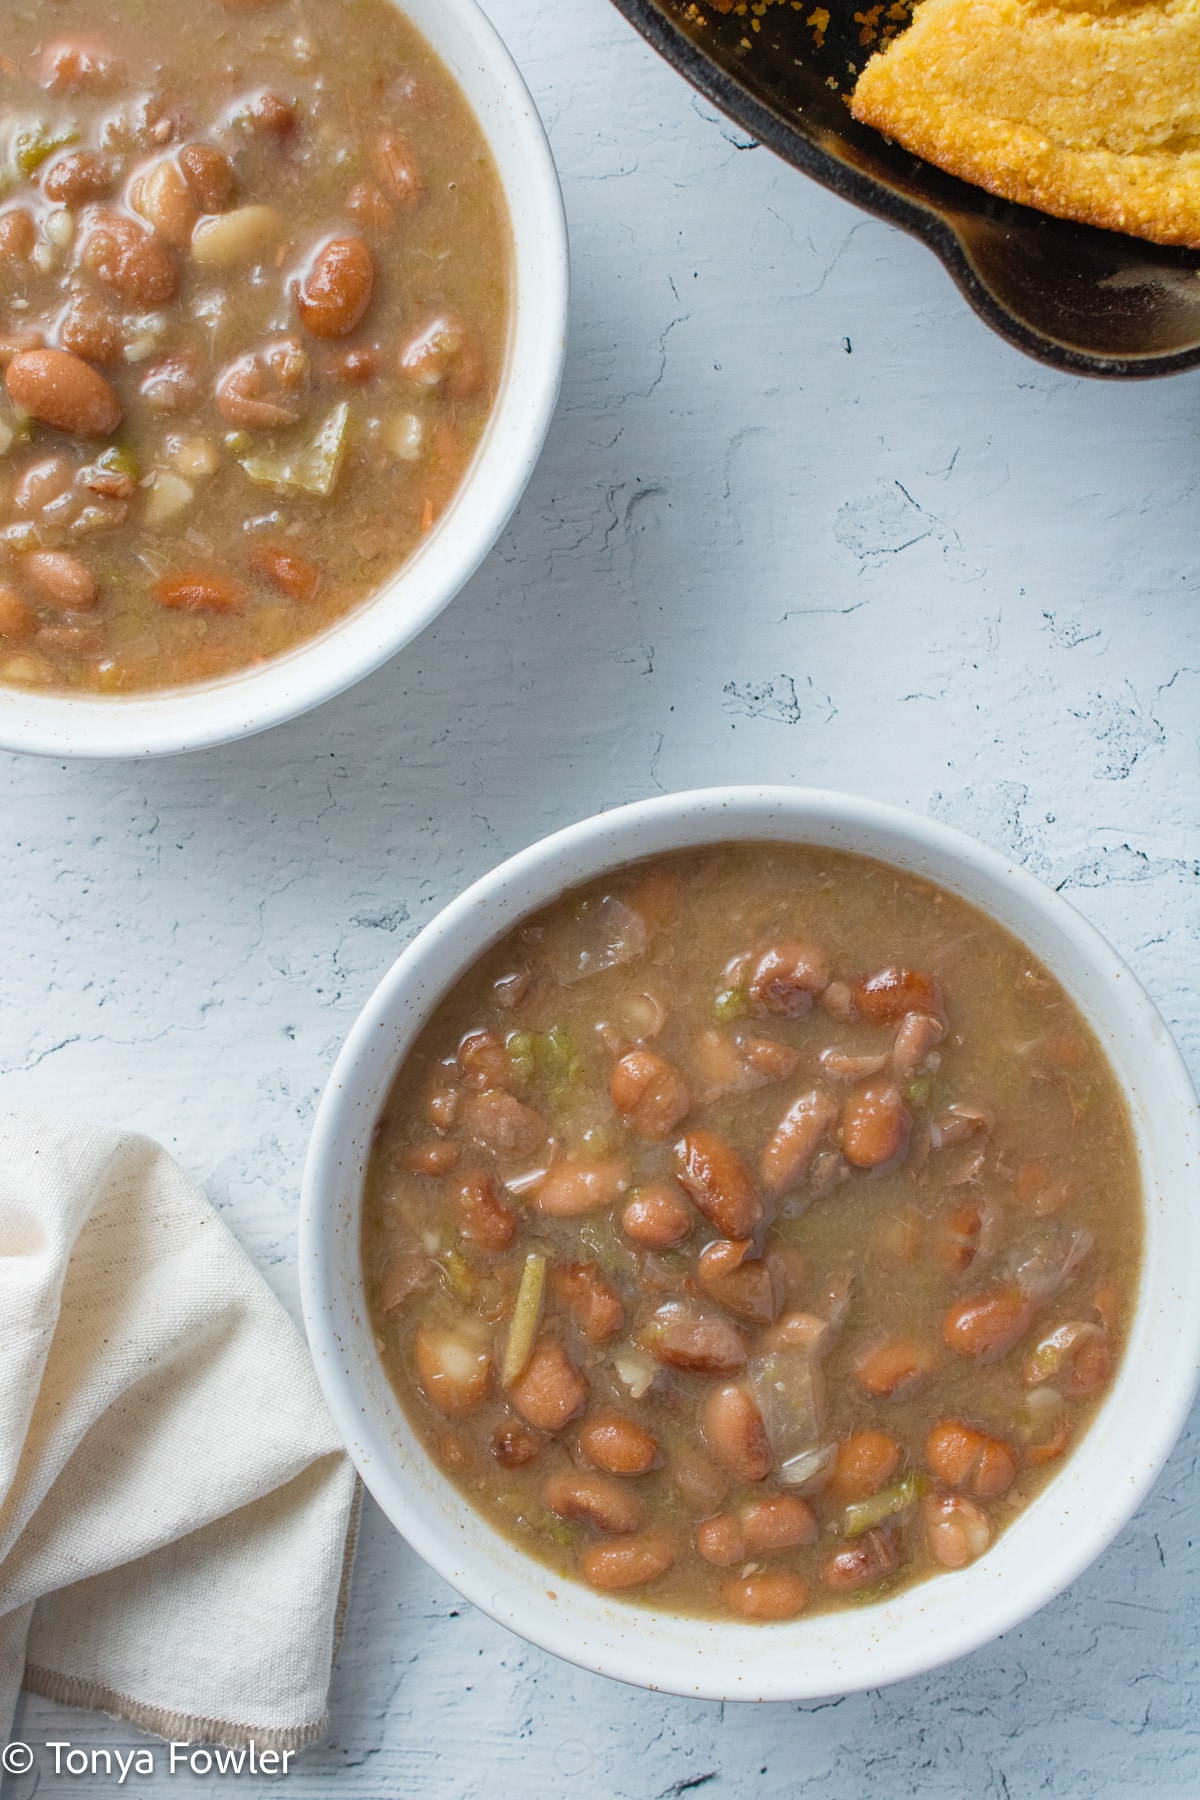 Two bowls of beans.